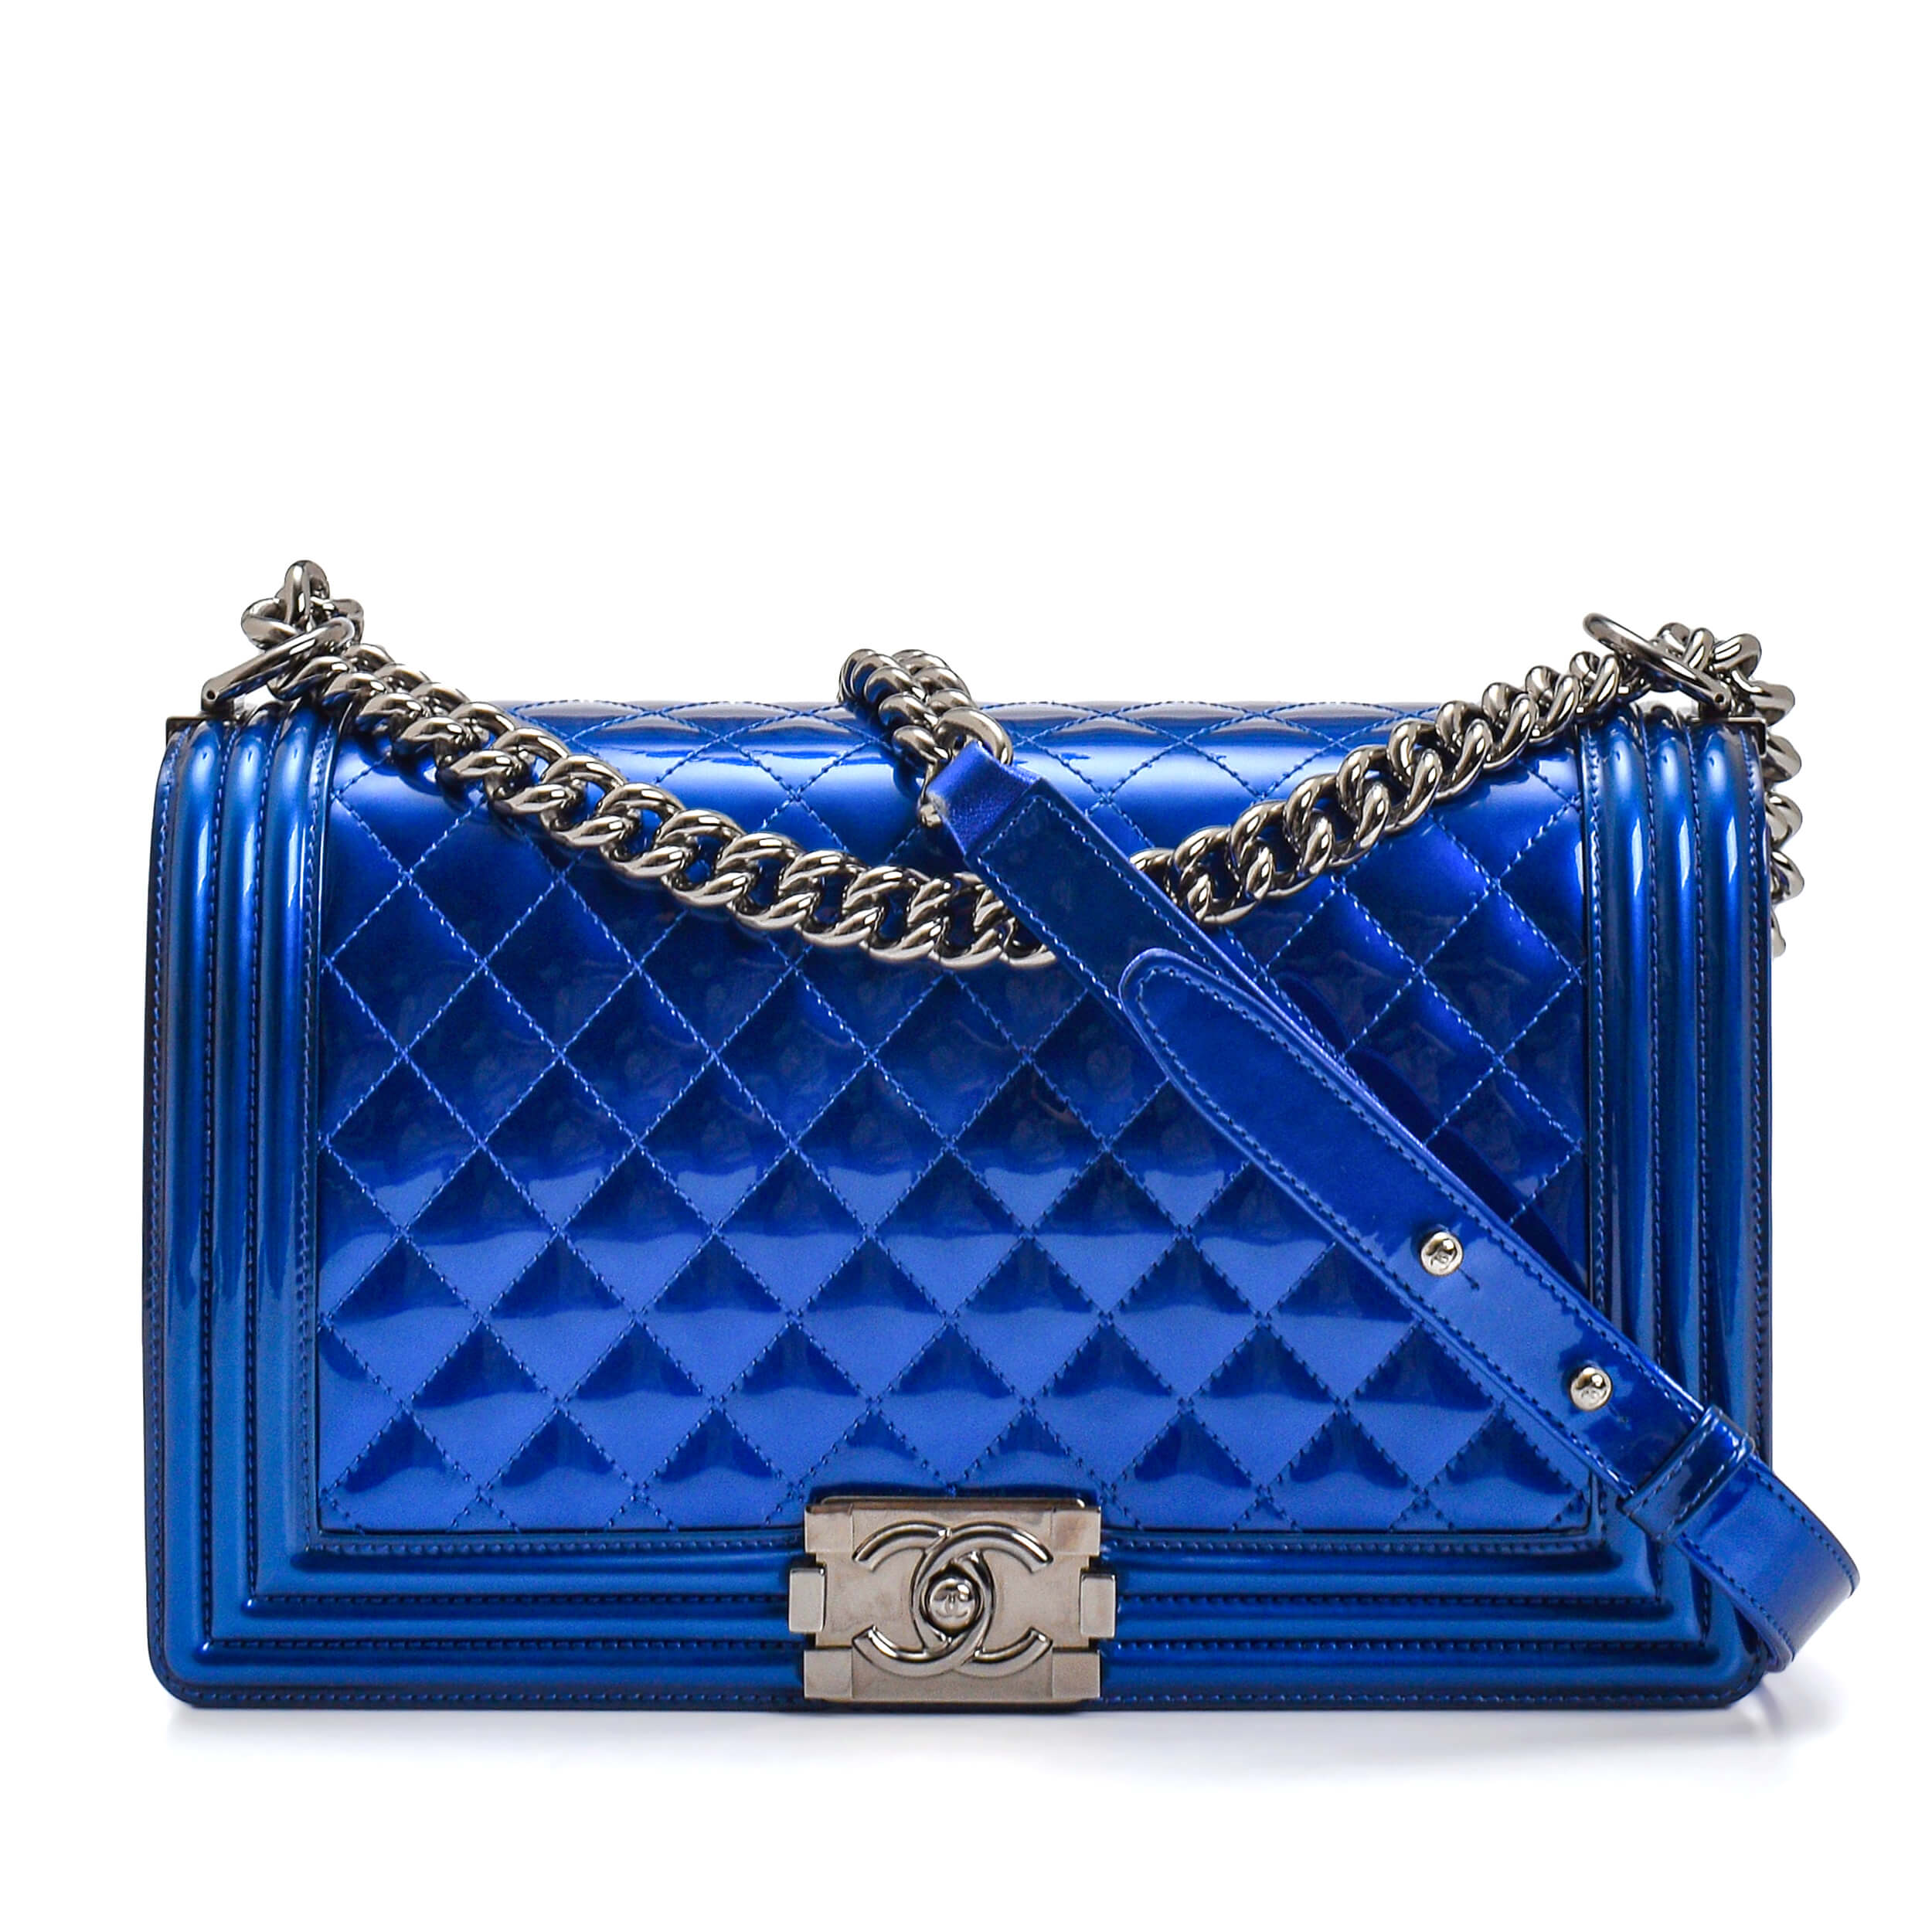 Chanel - Metallic Blue Quilted Patent Leather Medium Boy Bag